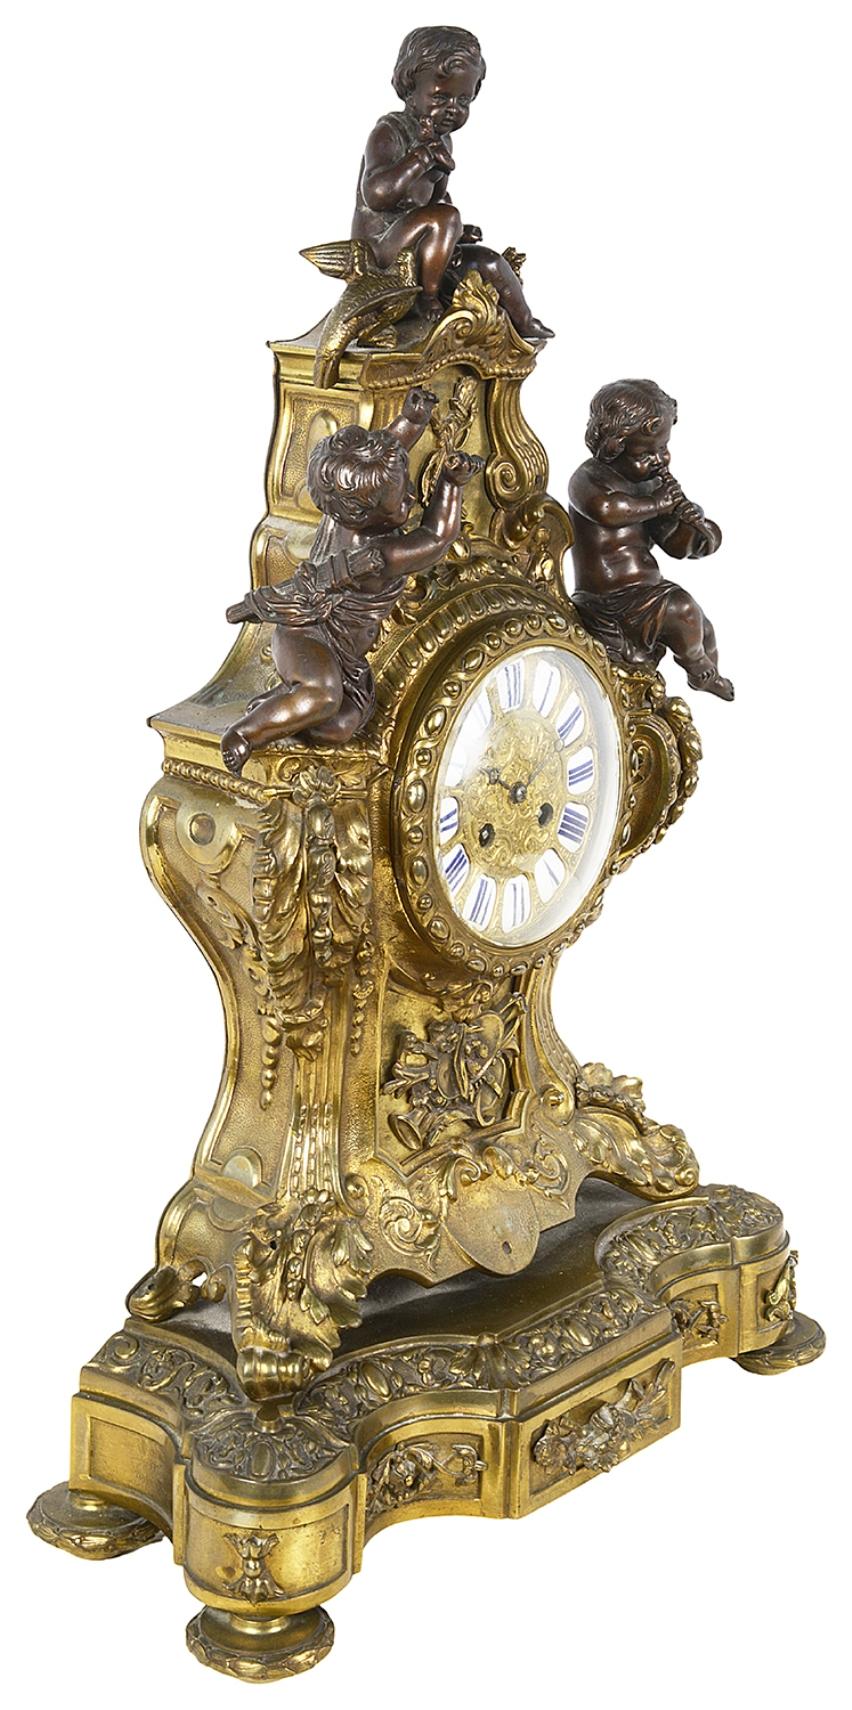 19th Century Gilded Ormolu and Bronze Mantel Clock In Good Condition For Sale In Brighton, Sussex